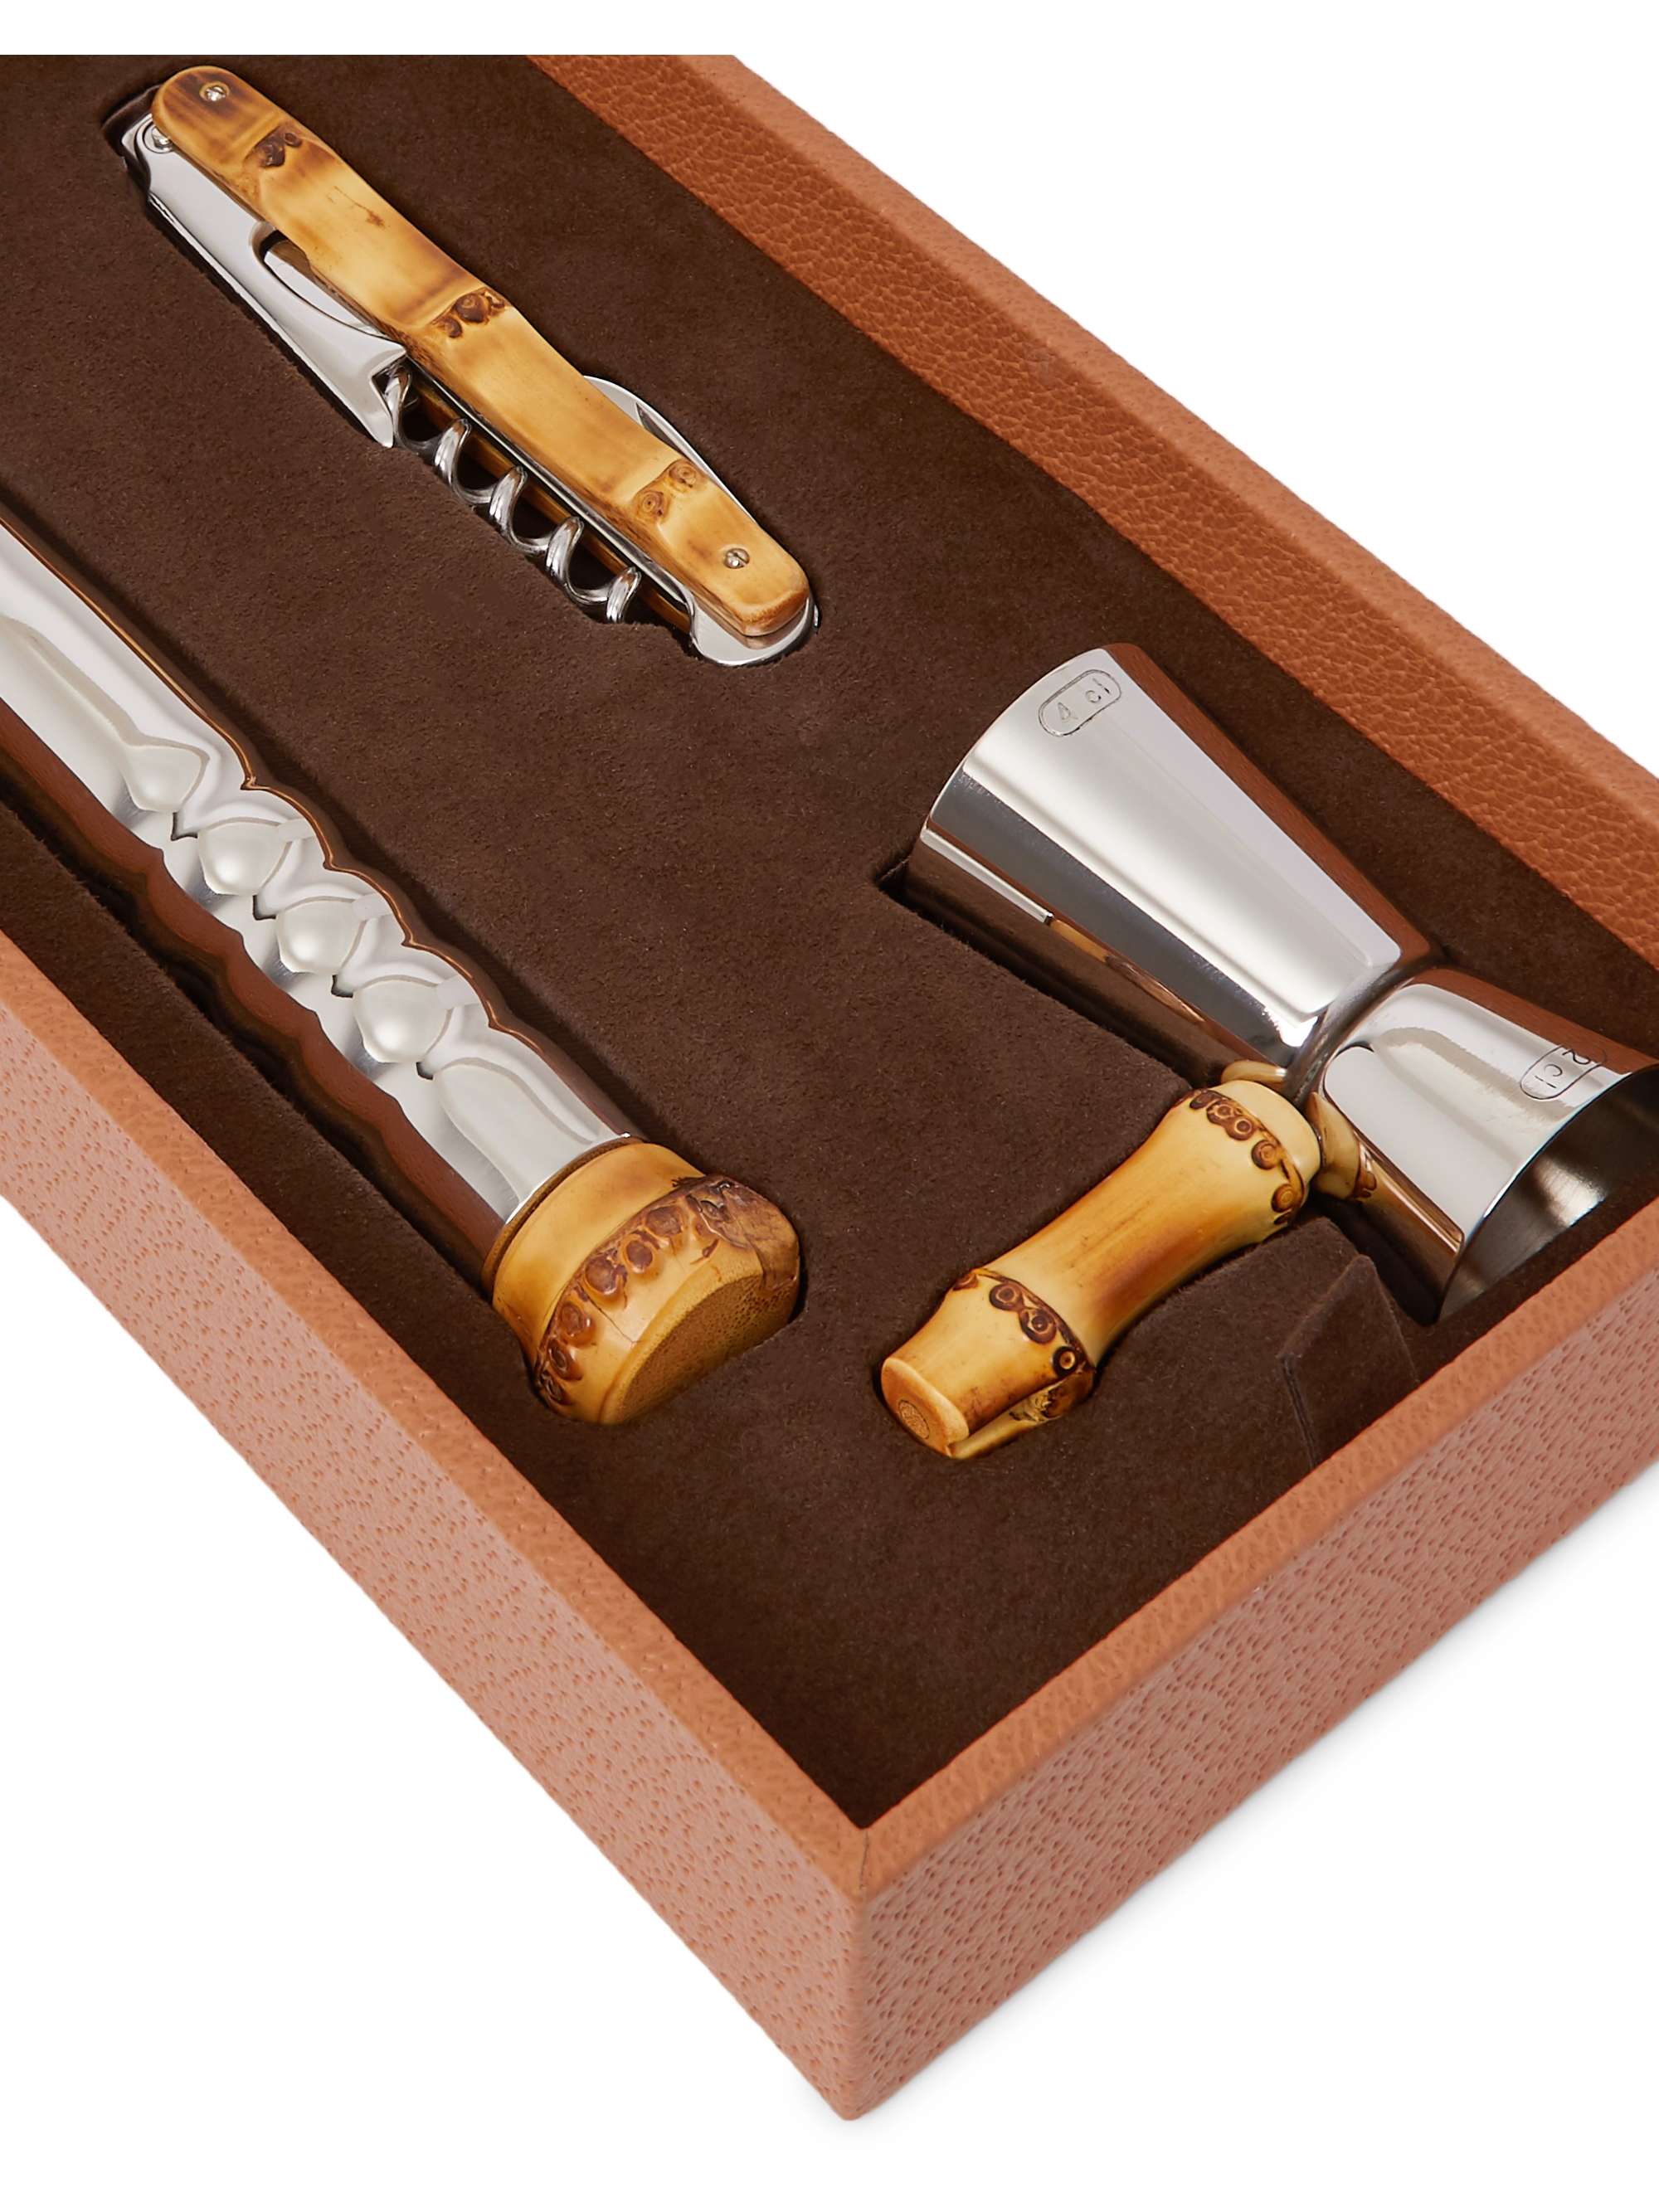 LORENZI MILANO Bamboo, Leather and Stainless Steel Cocktail Set